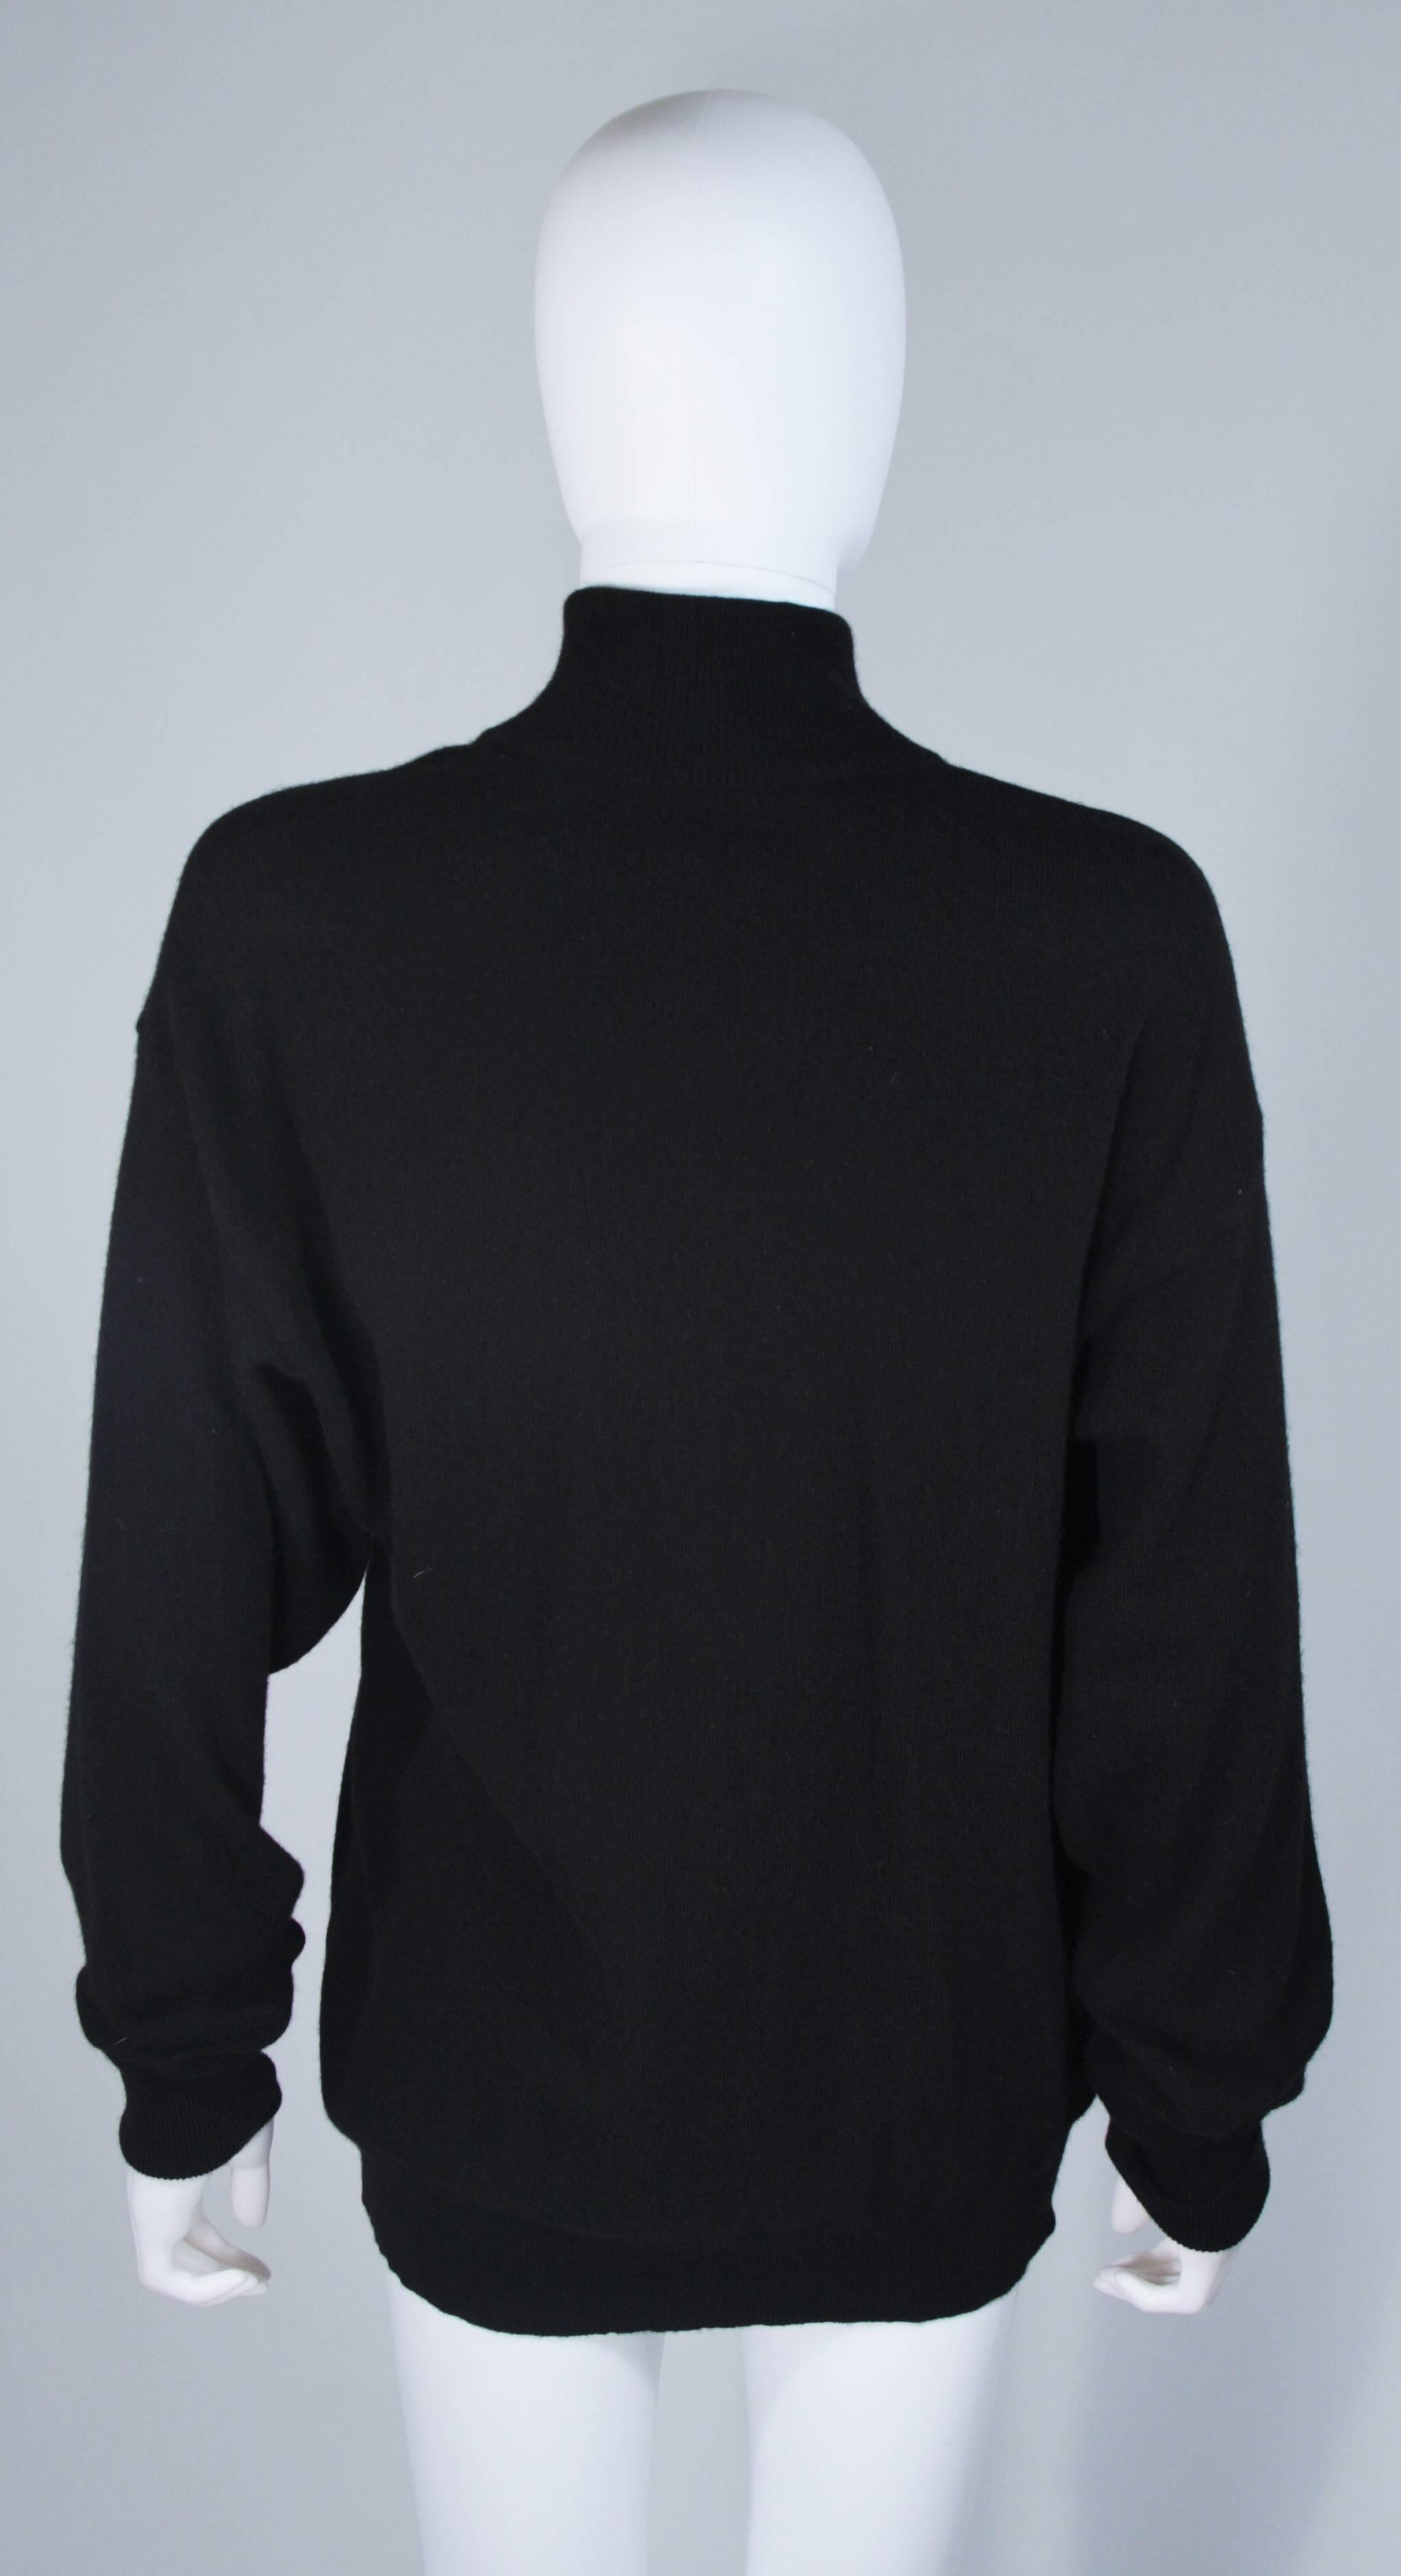 CHANEL Black Cashmere Sweater with Gold Buttons Size 38 4